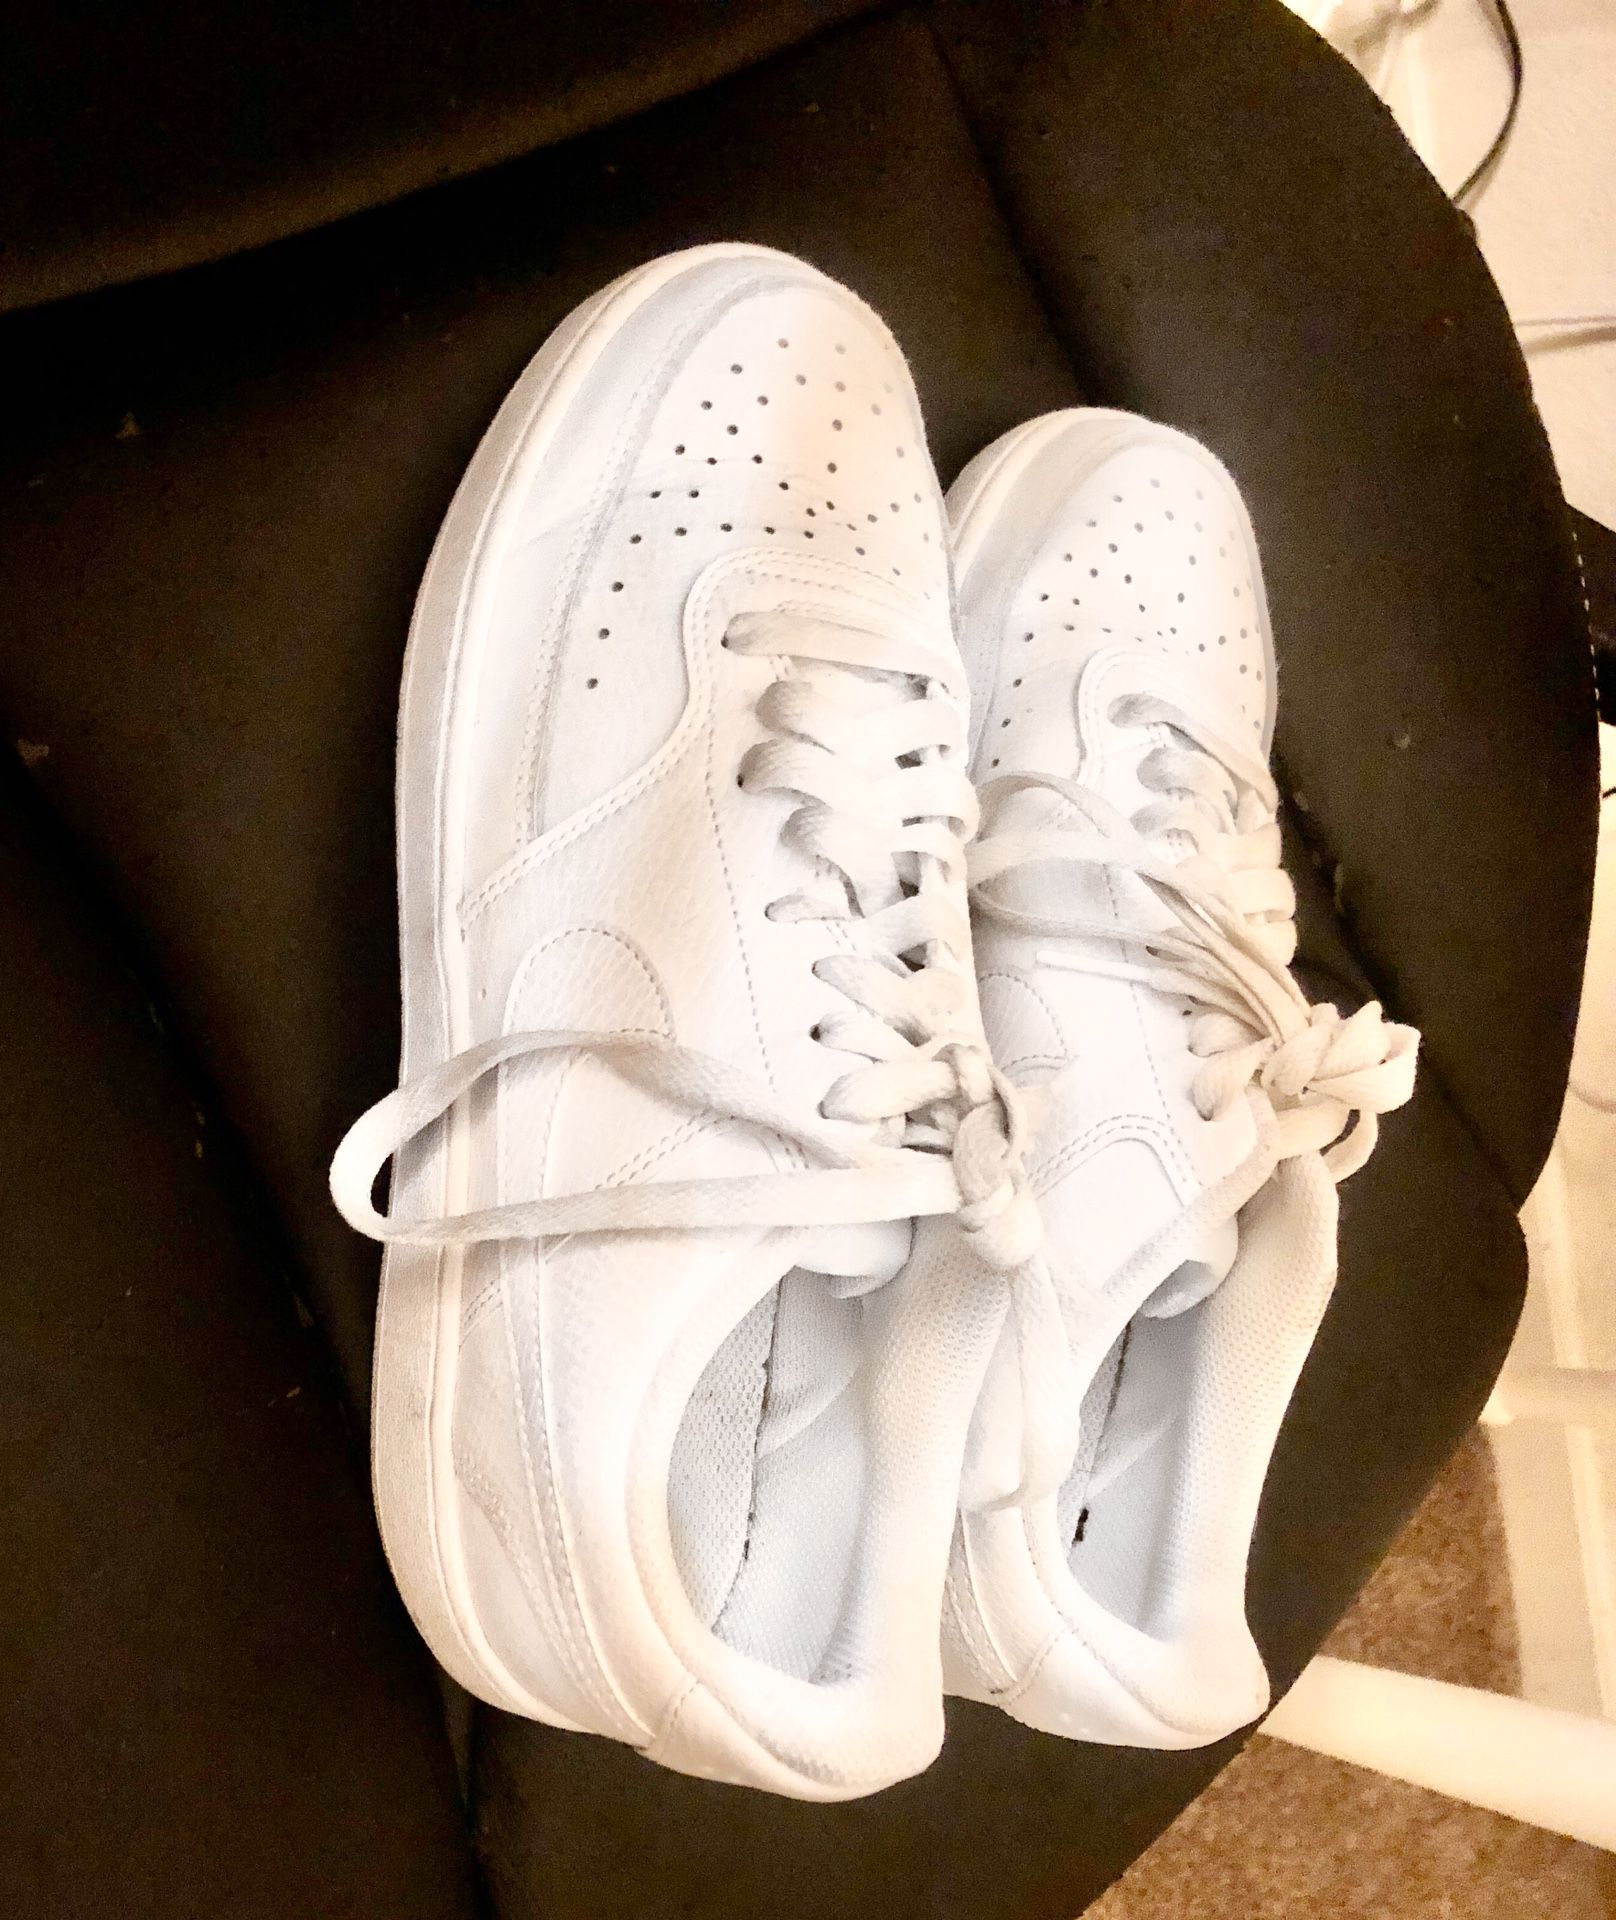 WHITE NIKE’S GREAT CONDITION (MAKE OFFER)